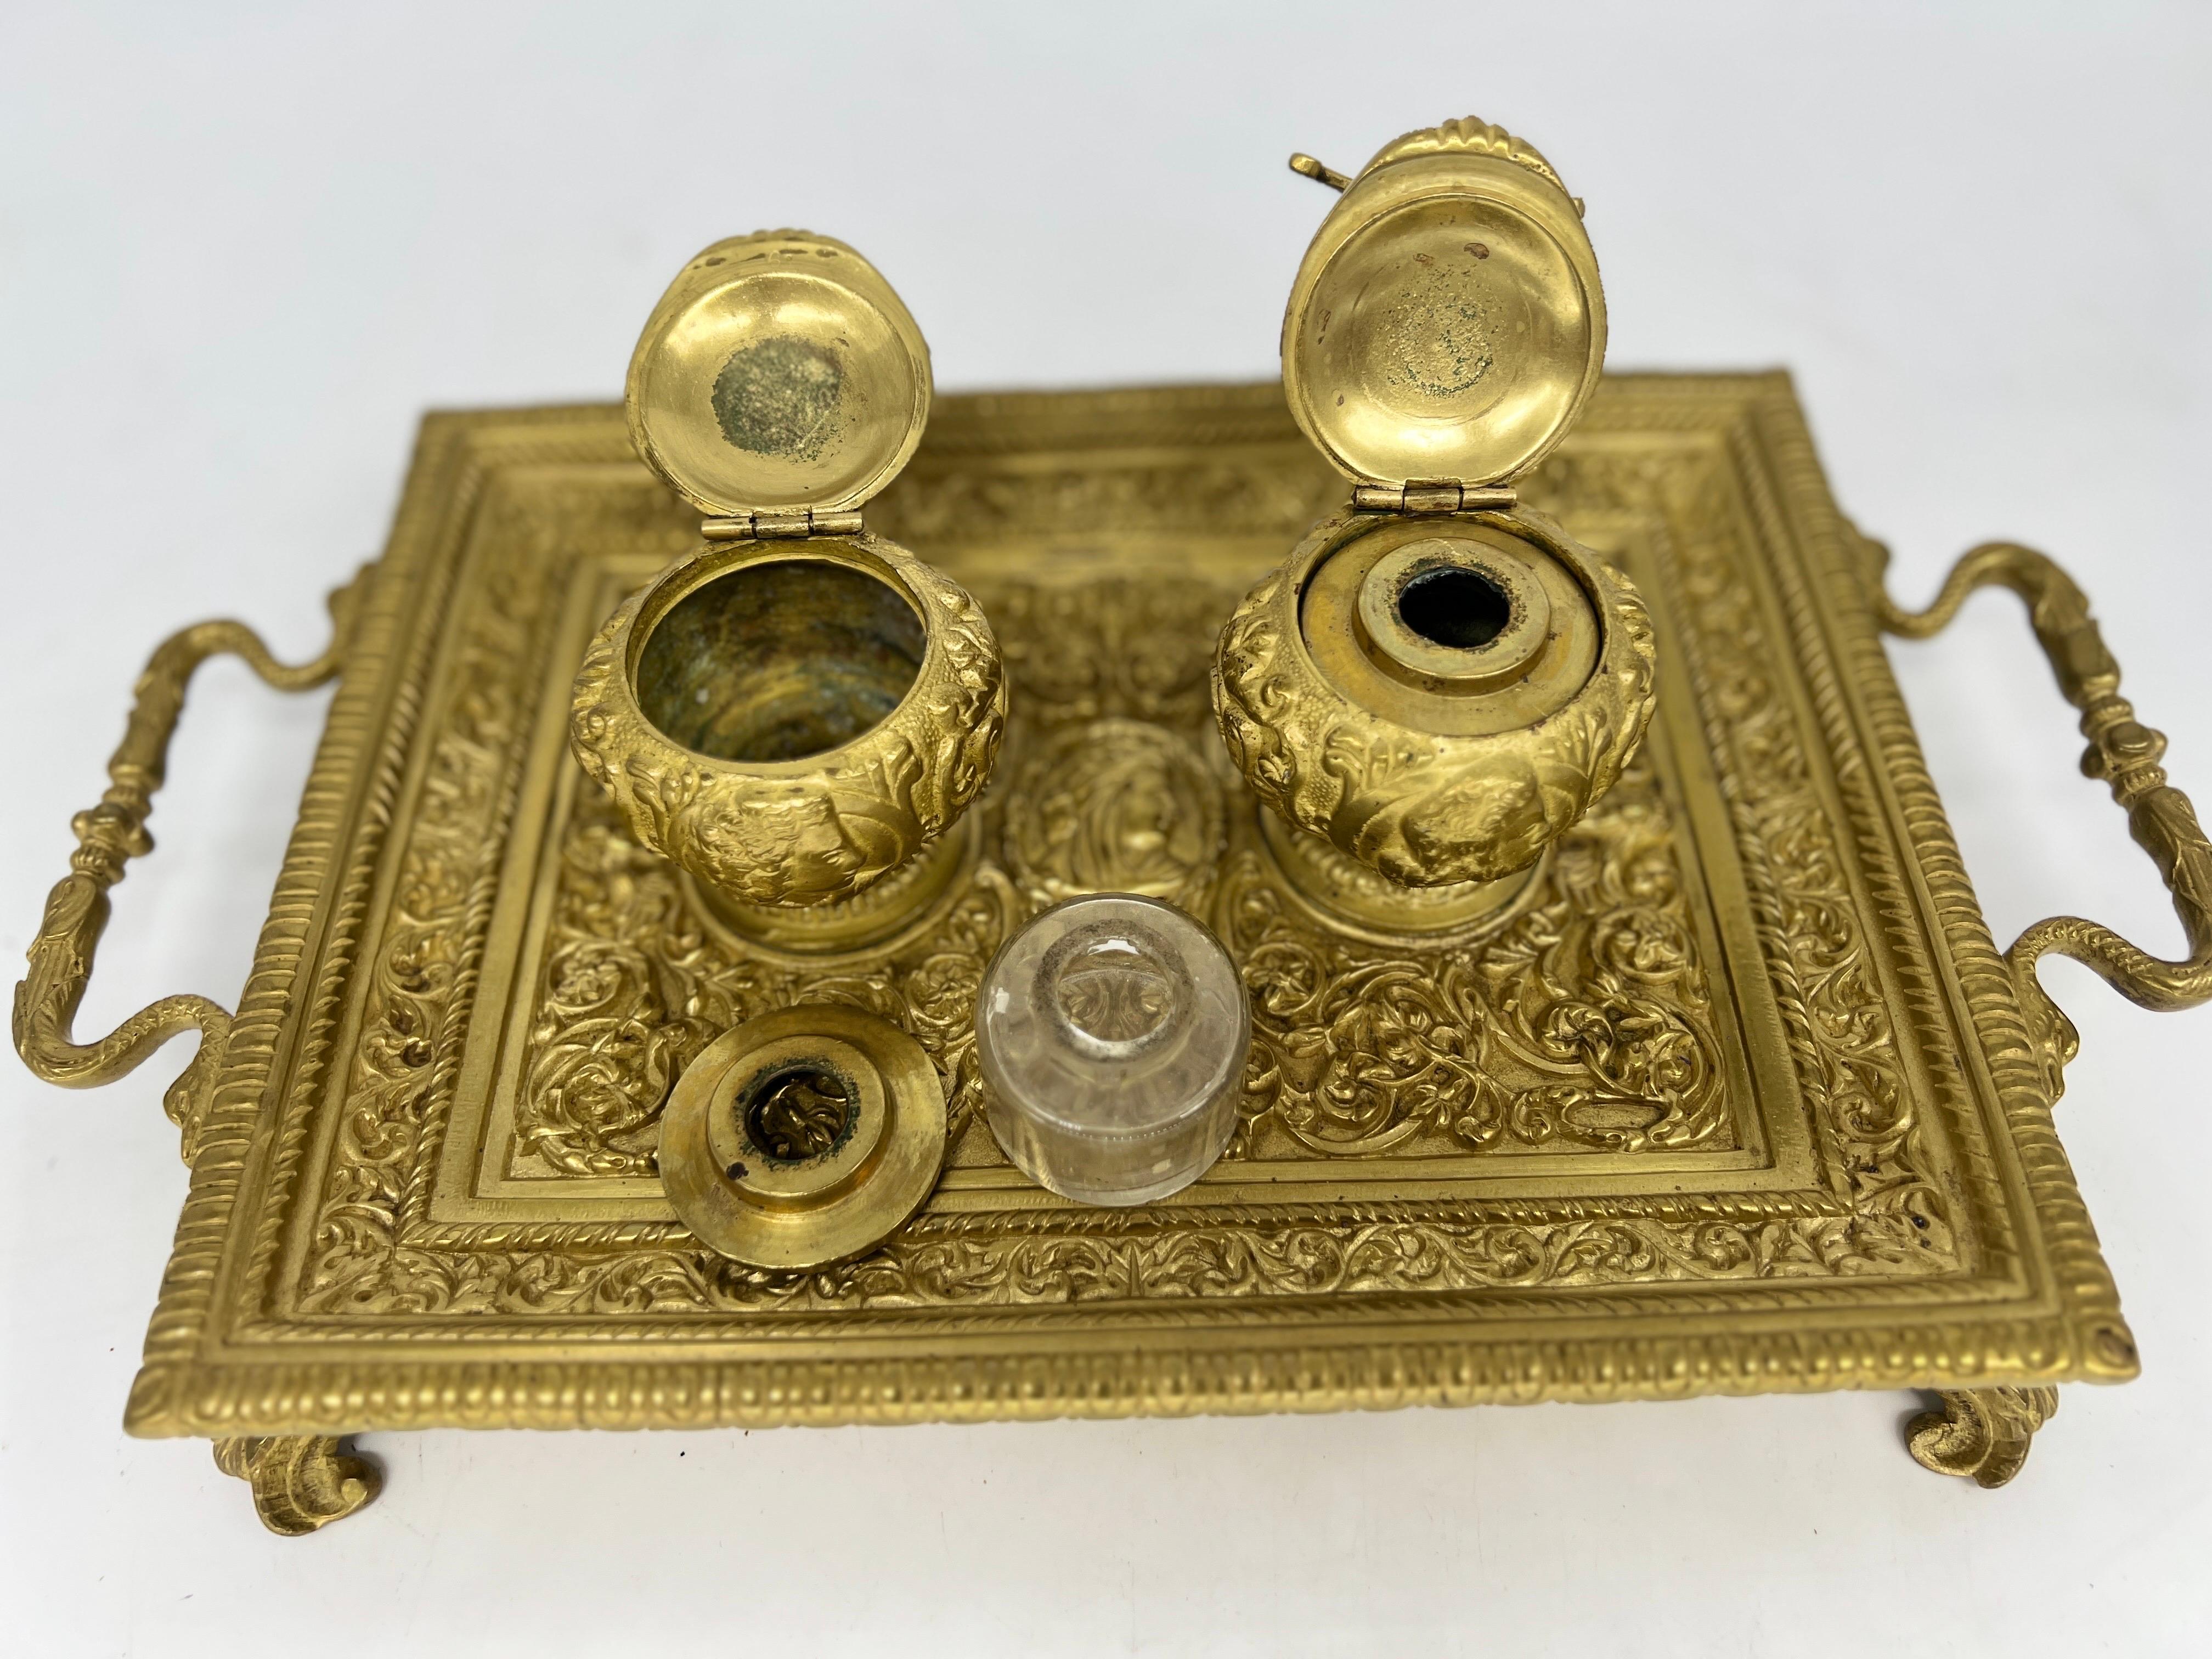 Emancipation Proclamation Inkstand - 19th Century Heavily Chased Brass For Sale 5